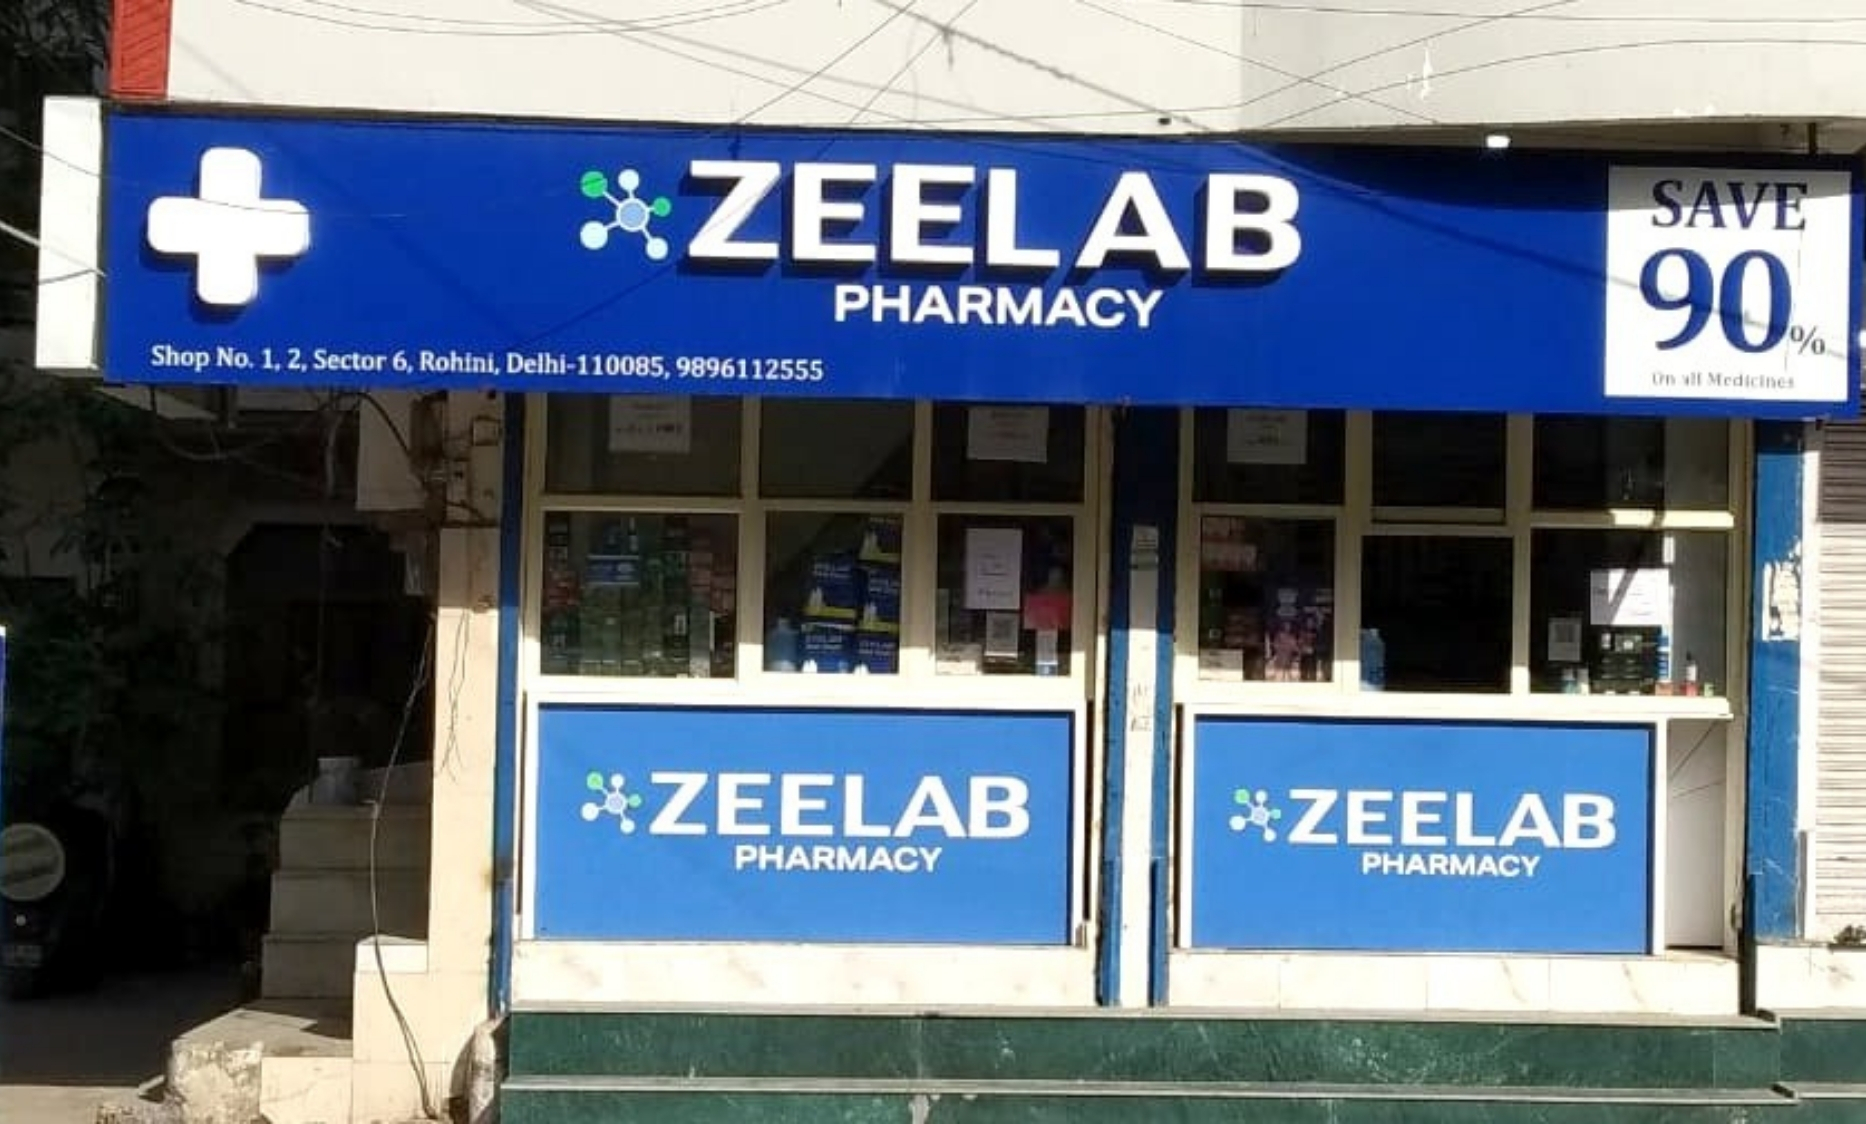 Zeelab Pharmacy selling 90% Affordable medicines hits 100cr ARR within 2 years - Digpu News